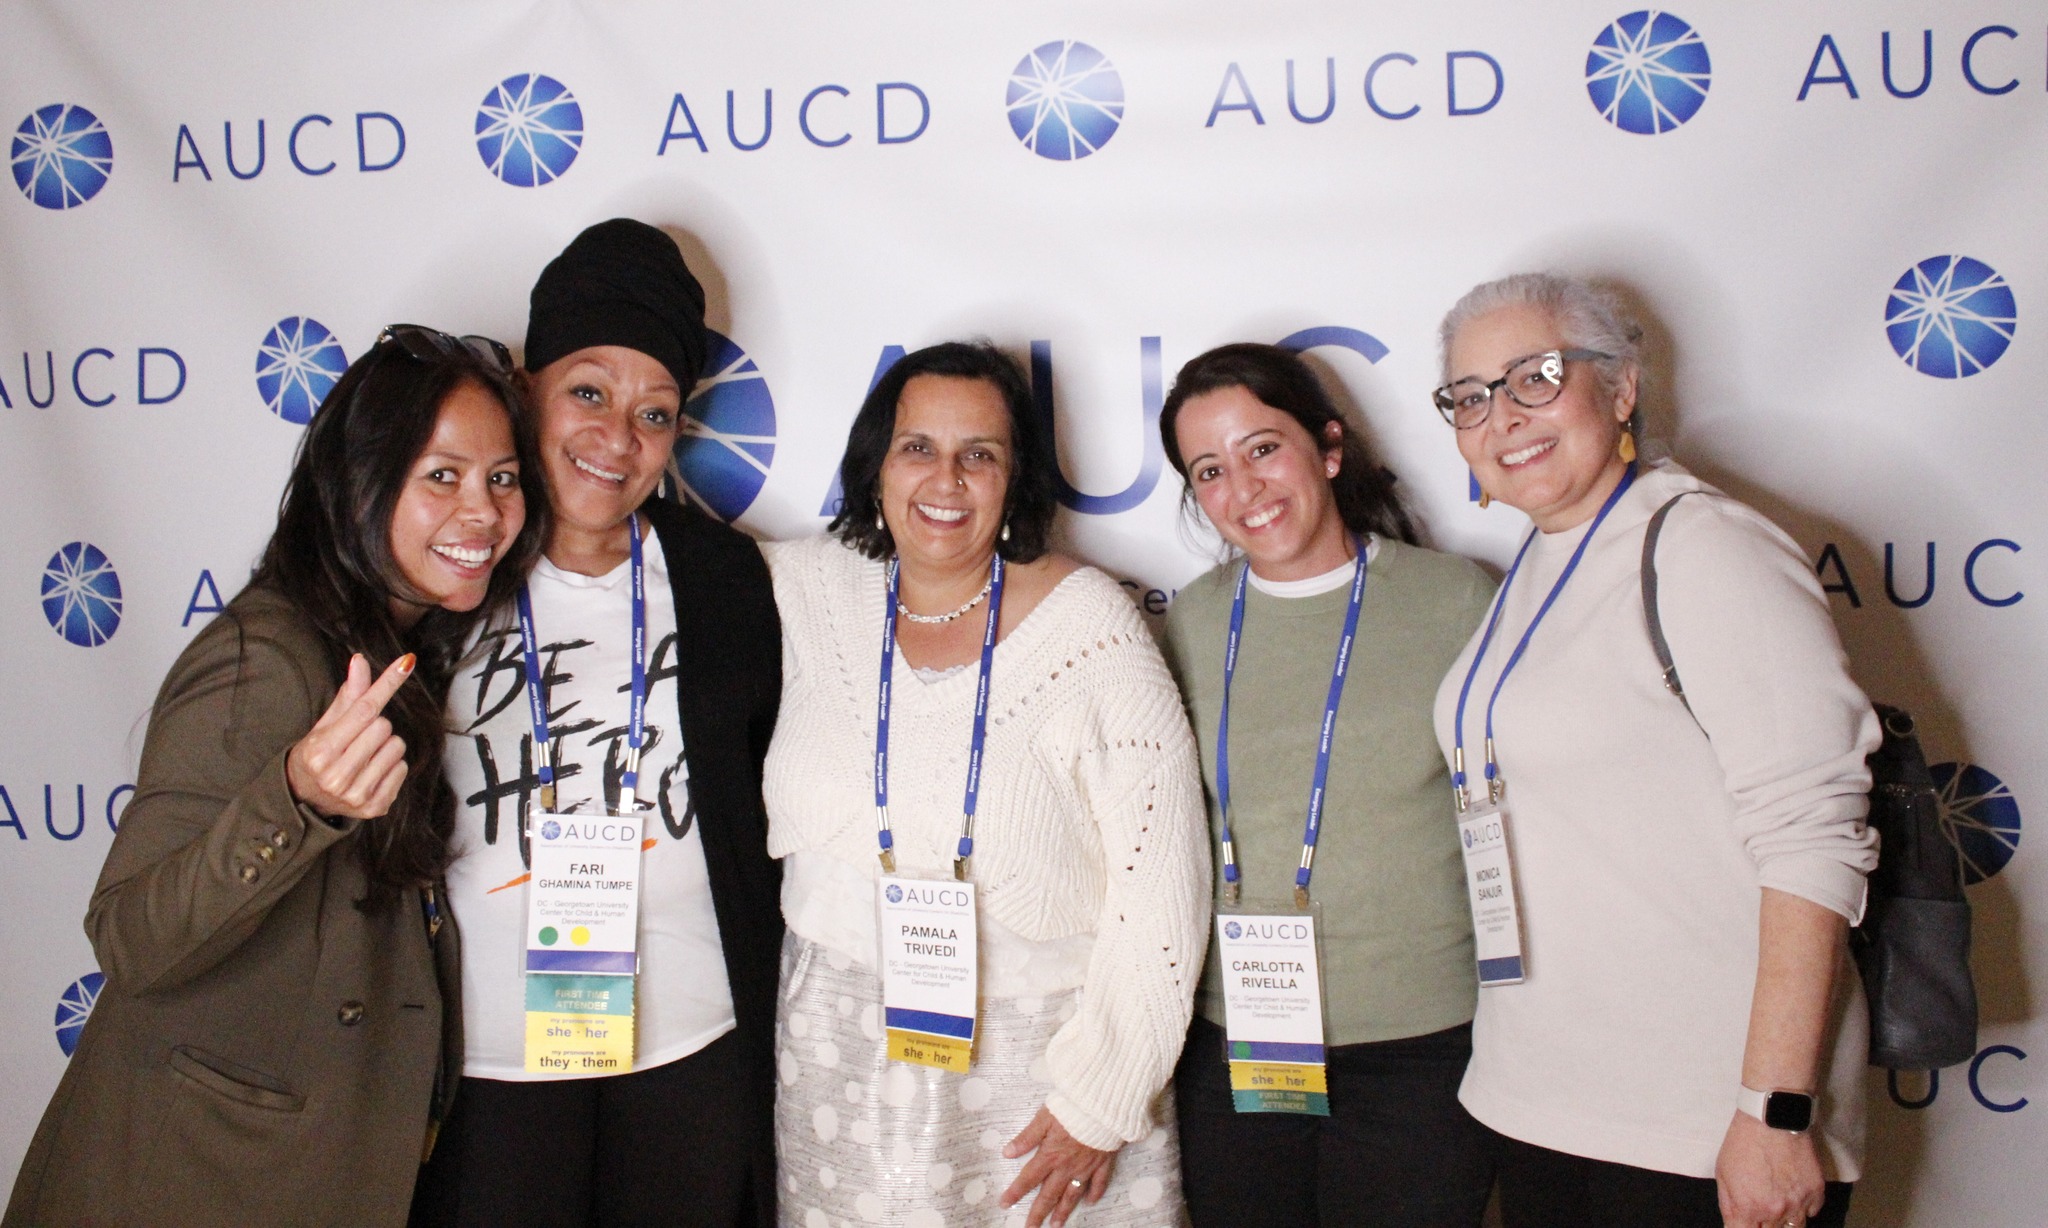 AUCD network members standing in front of AUCD banner smiling arm in arm